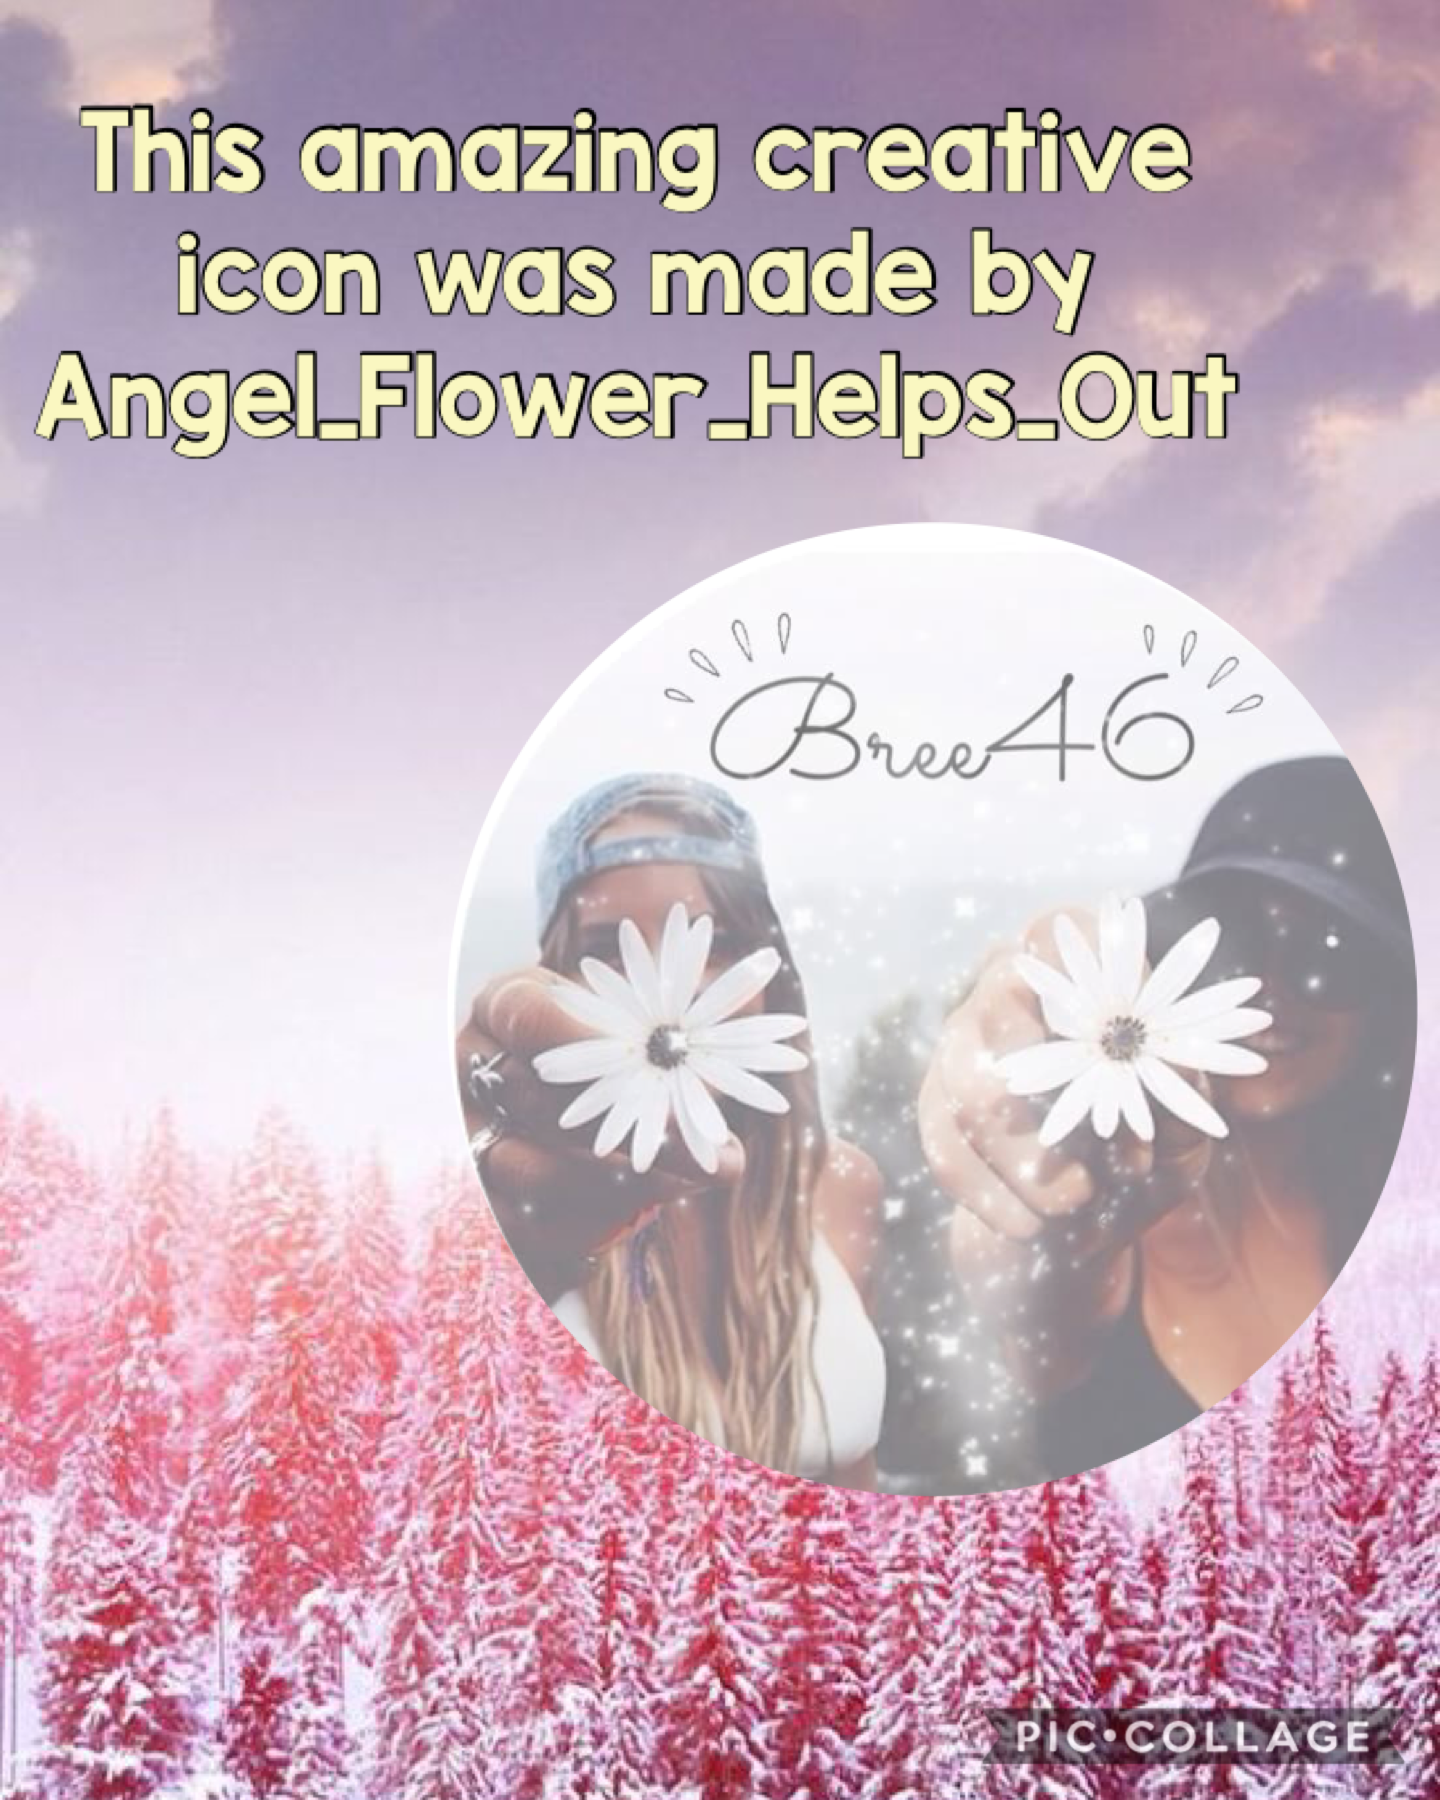 This amazing creative icon was by Angel_Flower_Helps_Out